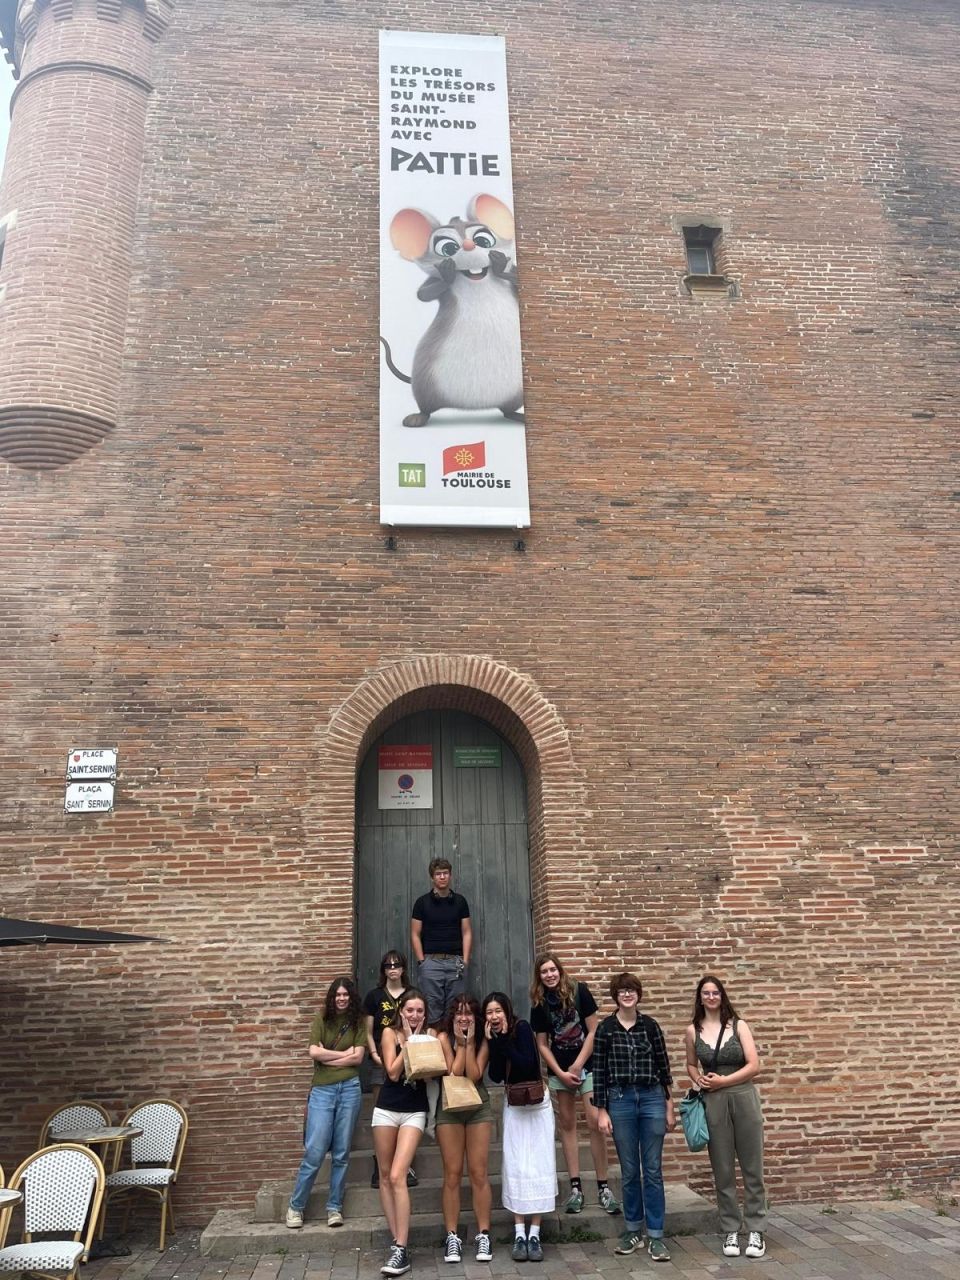 Students did an archaeological dive into the history of Toulouse at the Saint-Raymond Museum.